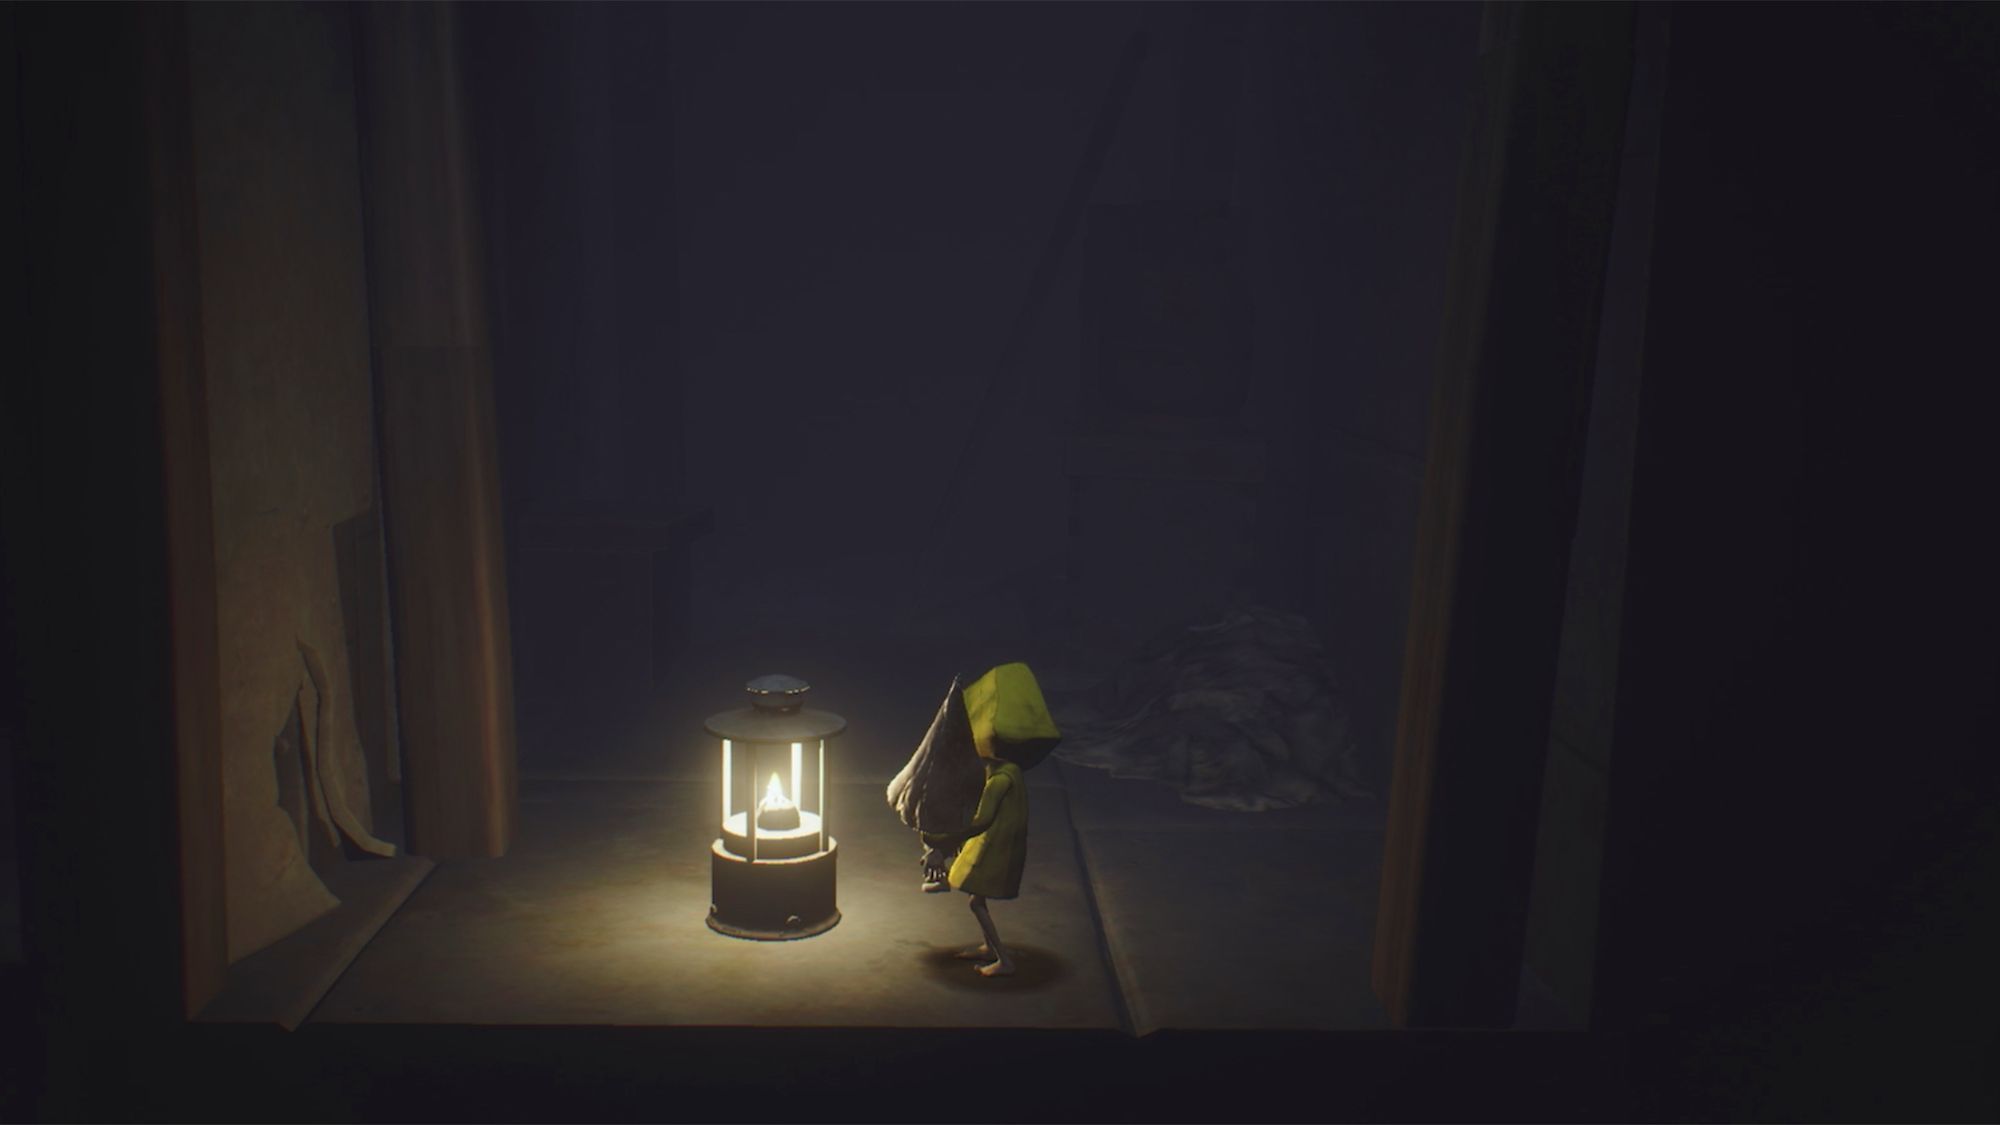 Little Nightmares - Android game screenshots.